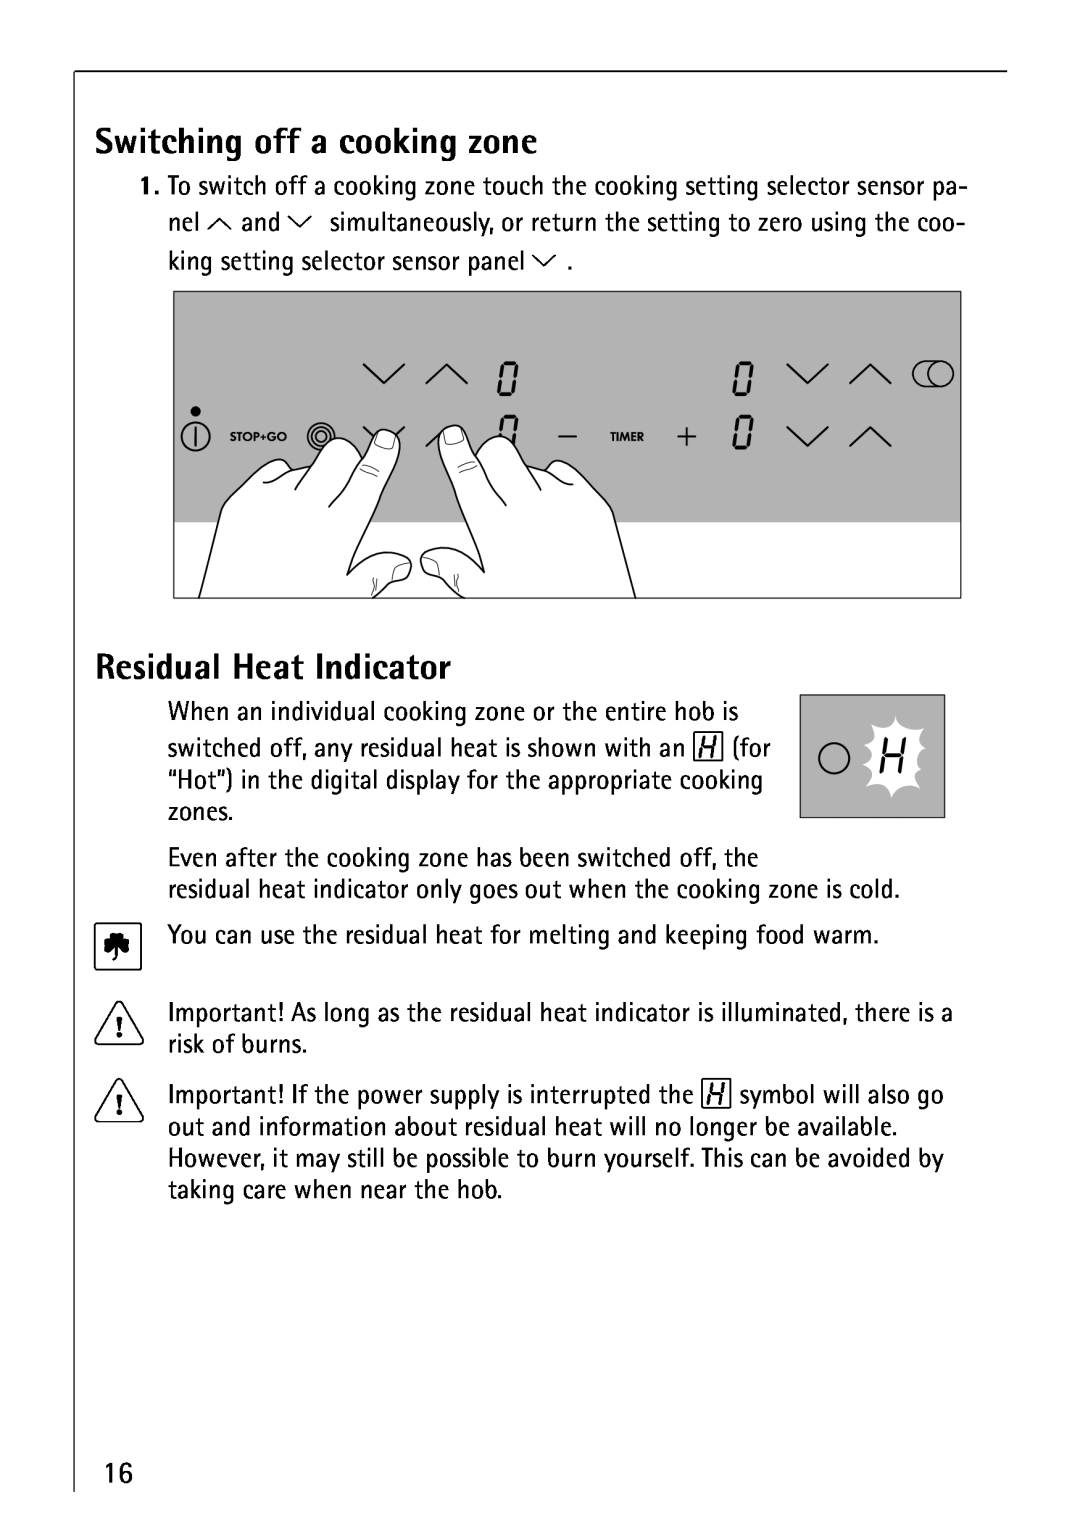 Electrolux 66300KF-an installation instructions Switching off a cooking zone, Residual Heat Indicator 